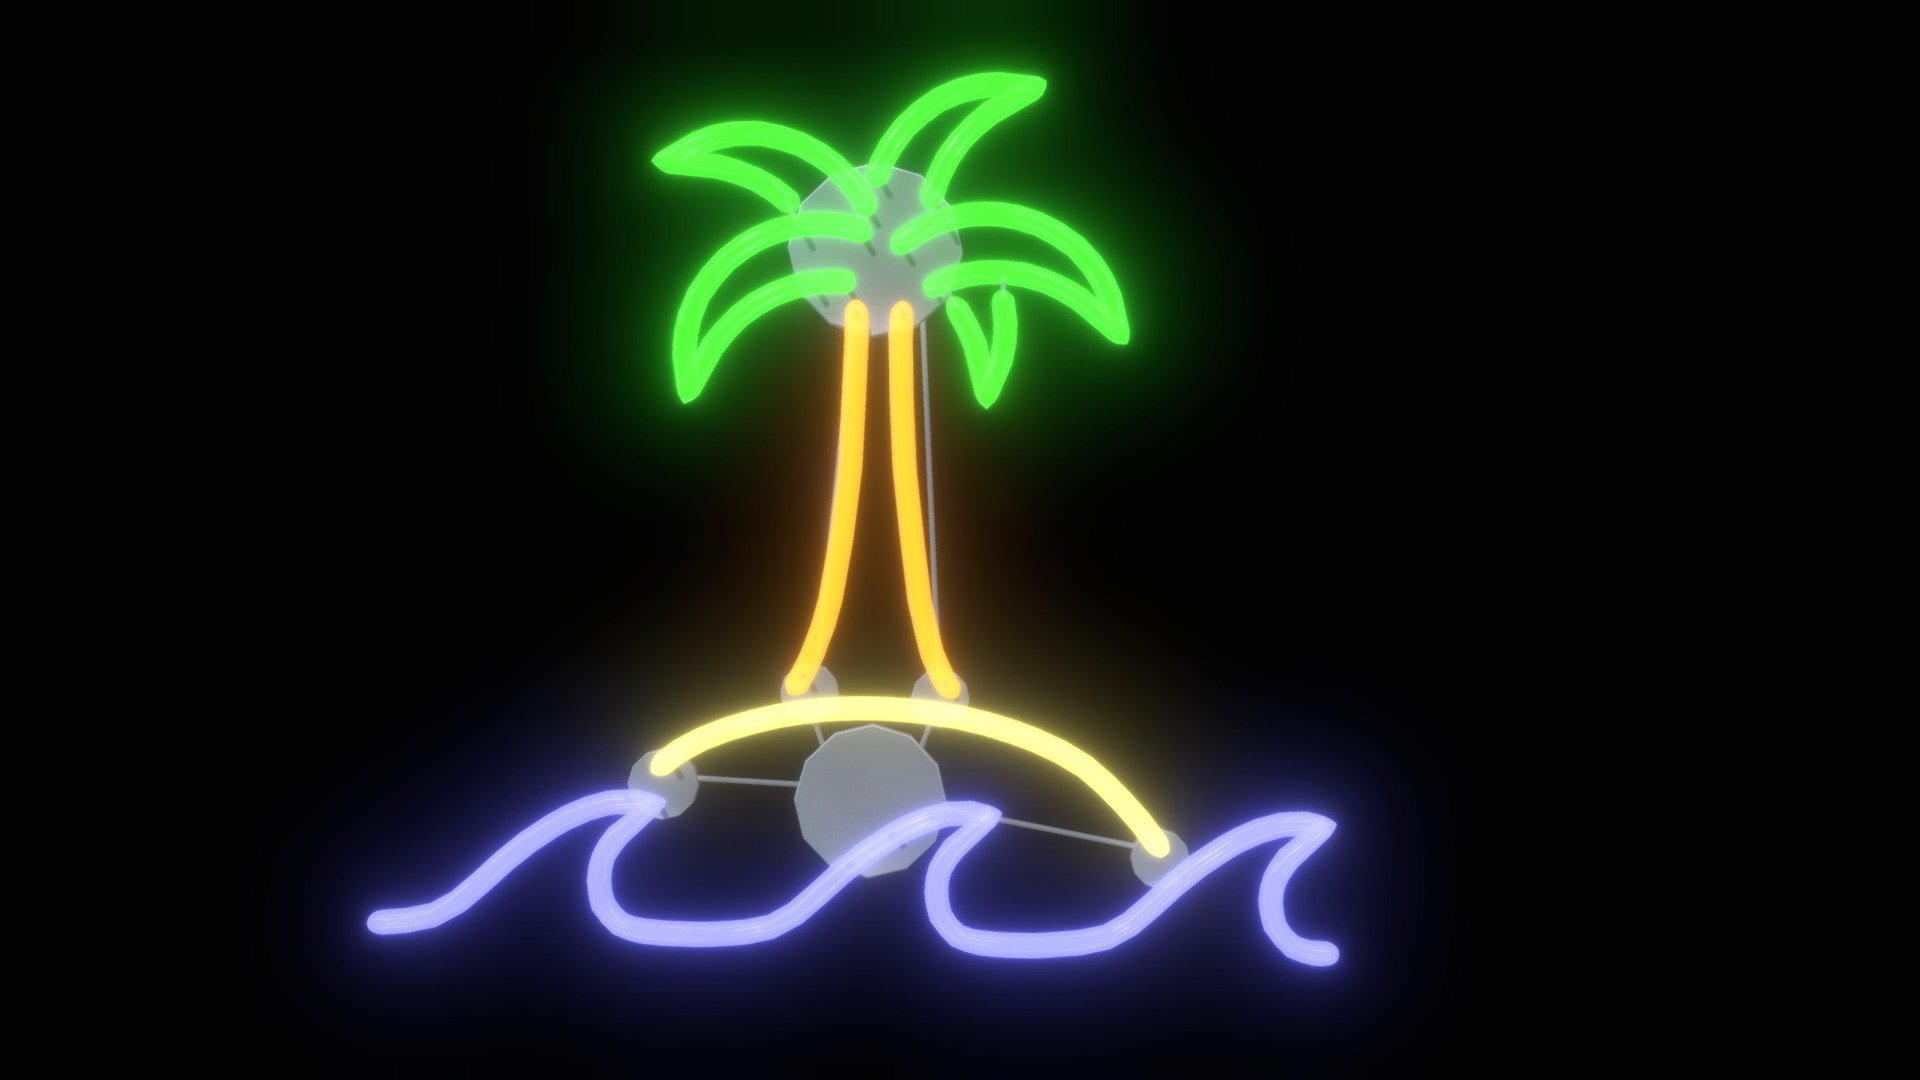 Just another small neon sign I decided to make. Hope everyone enjoys 3d model